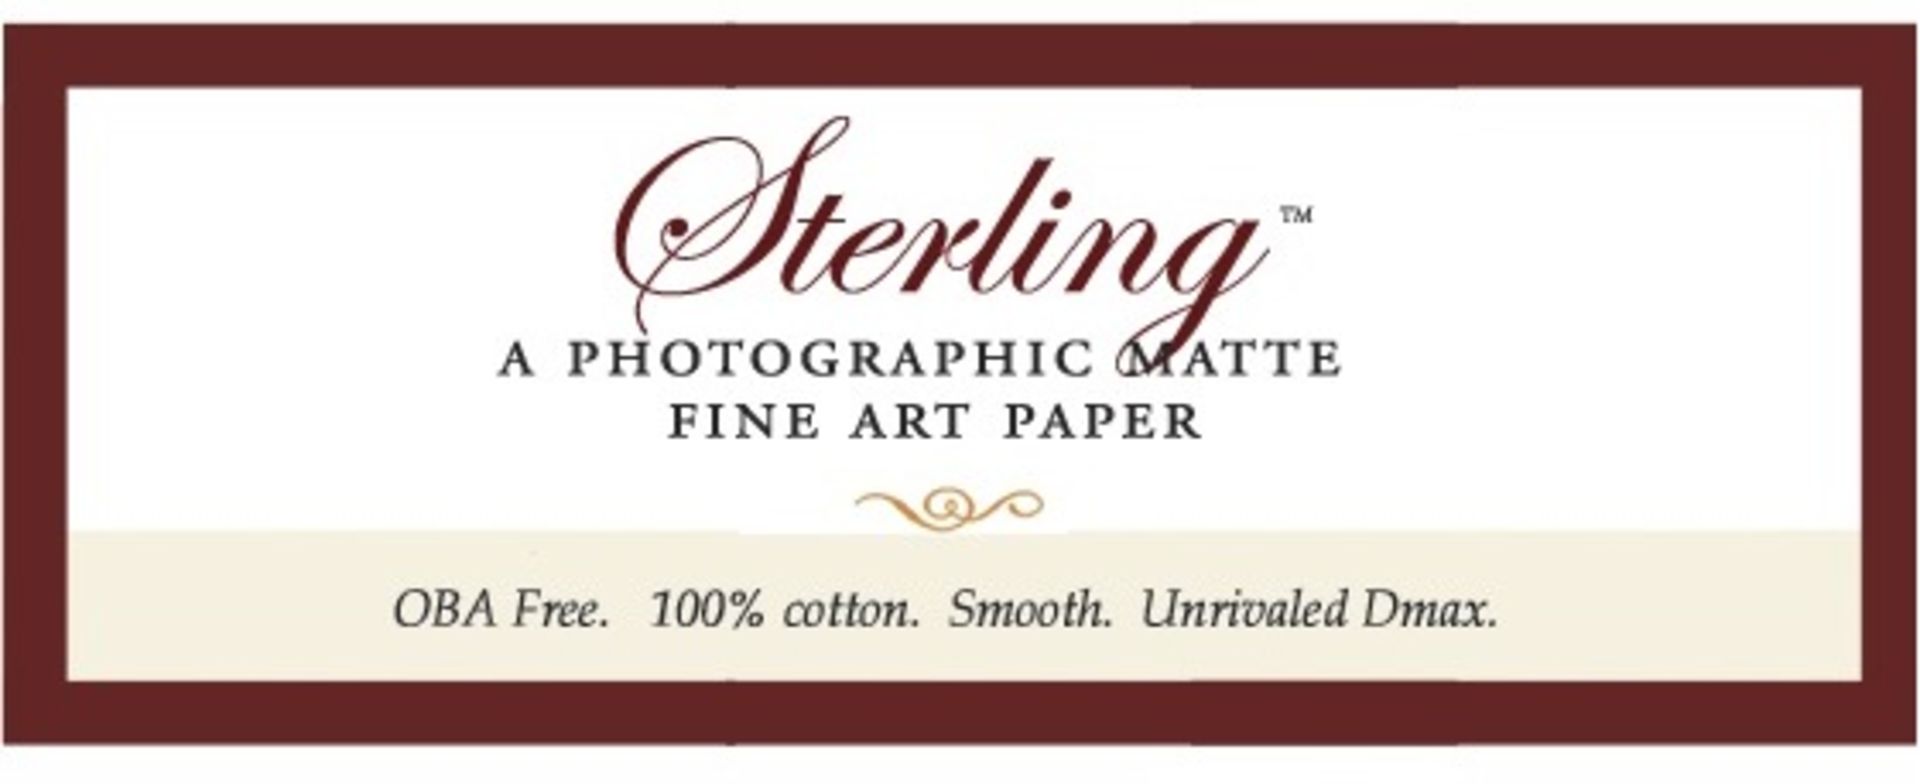 1 x Roll of Breathing Colour STERLING Photographic Matte Fine Art Paper - Size 24" x 40' - - Image 5 of 5